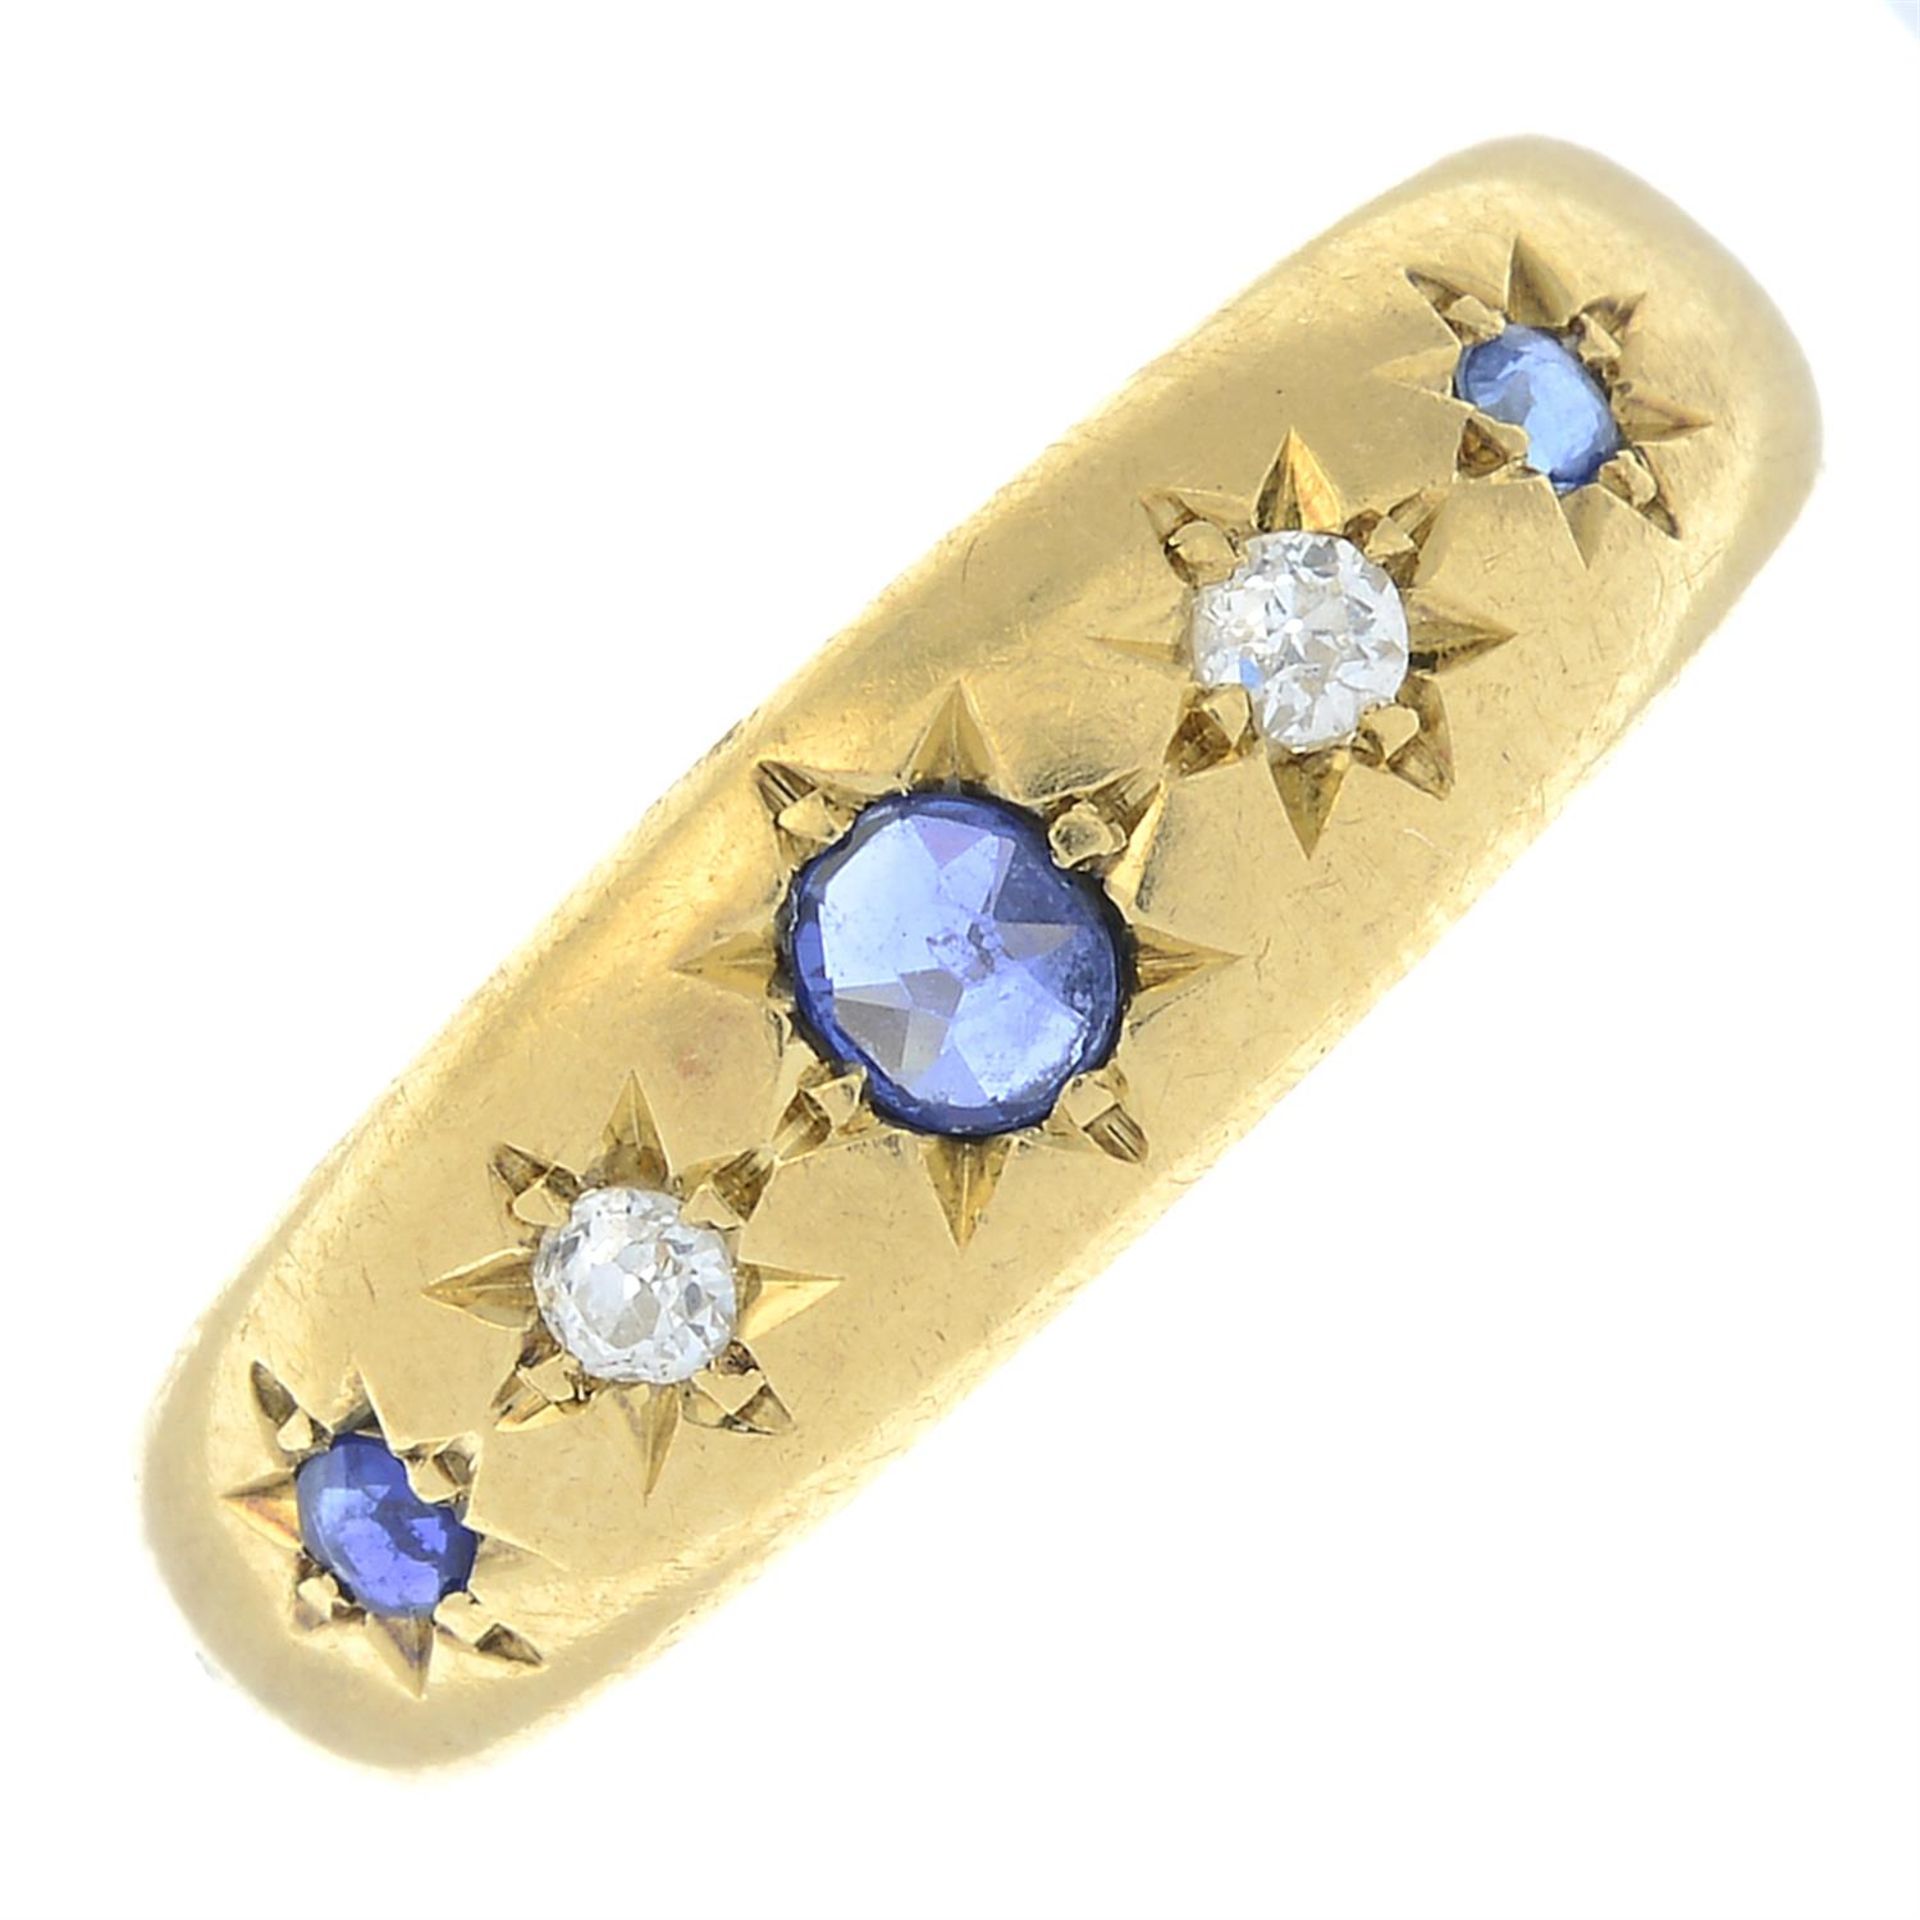 An Edwardian 18ct gold star-set sapphire and old-cut diamond band ring.